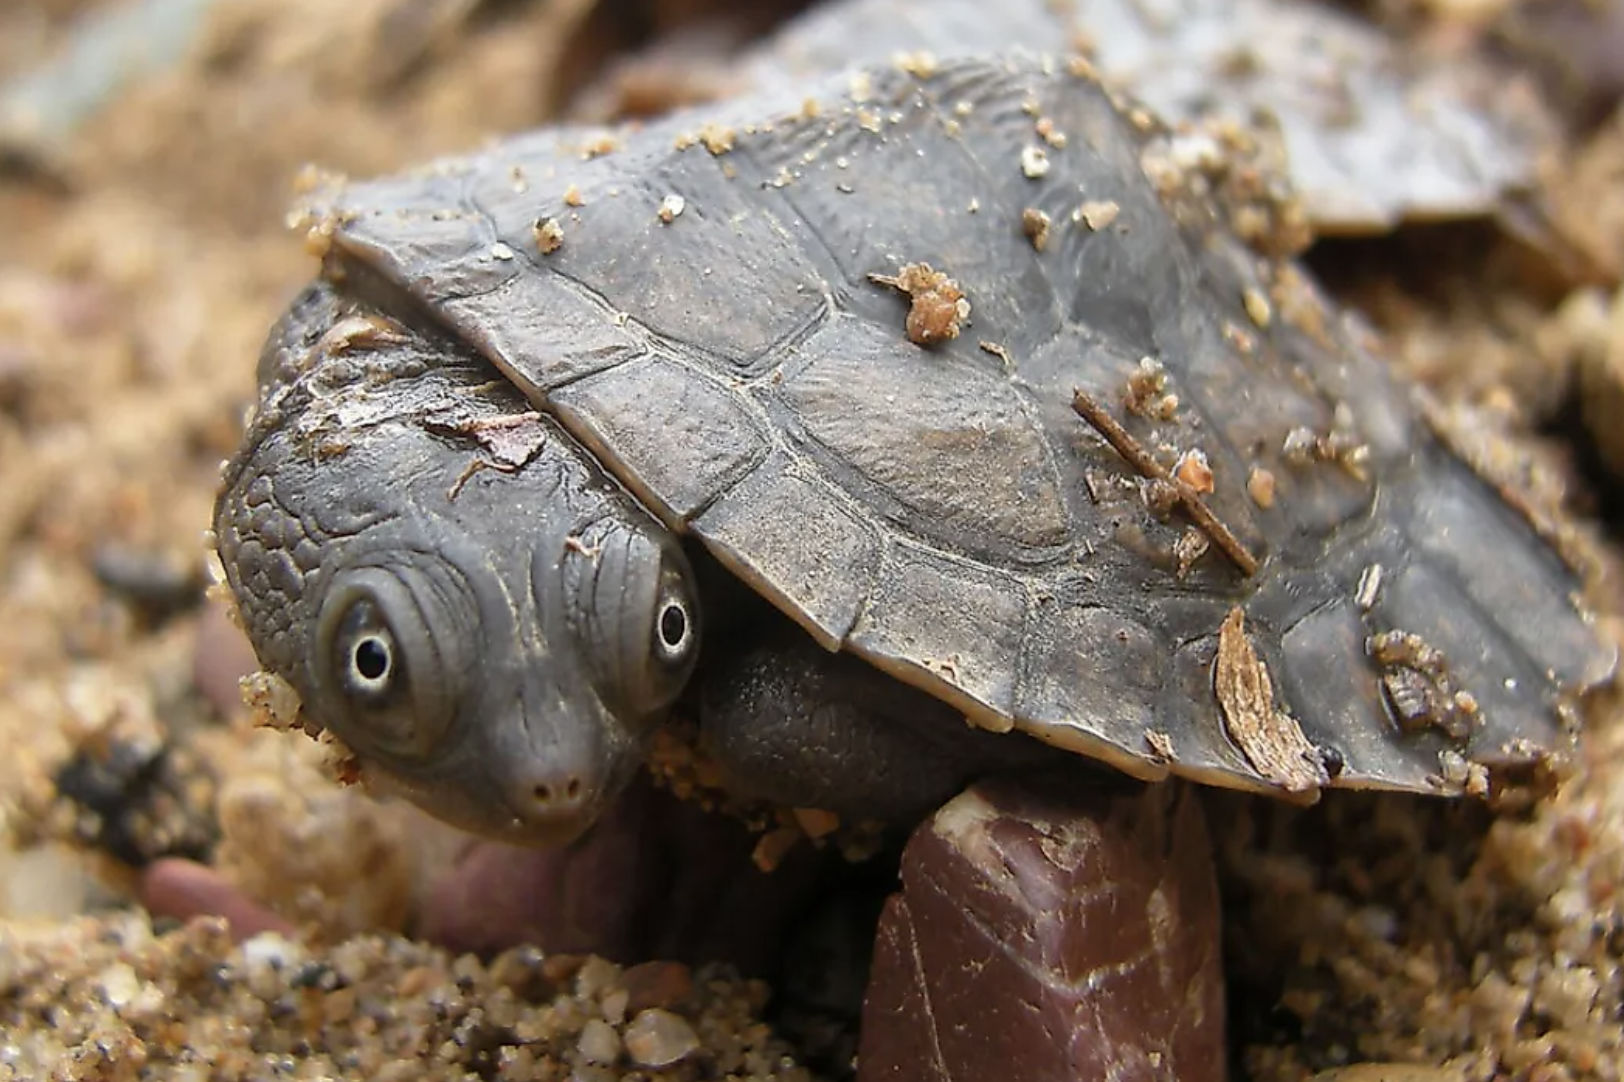 Image for article: Thanks to Tiaro — how this small Aussie town is saving the Mary River turtle